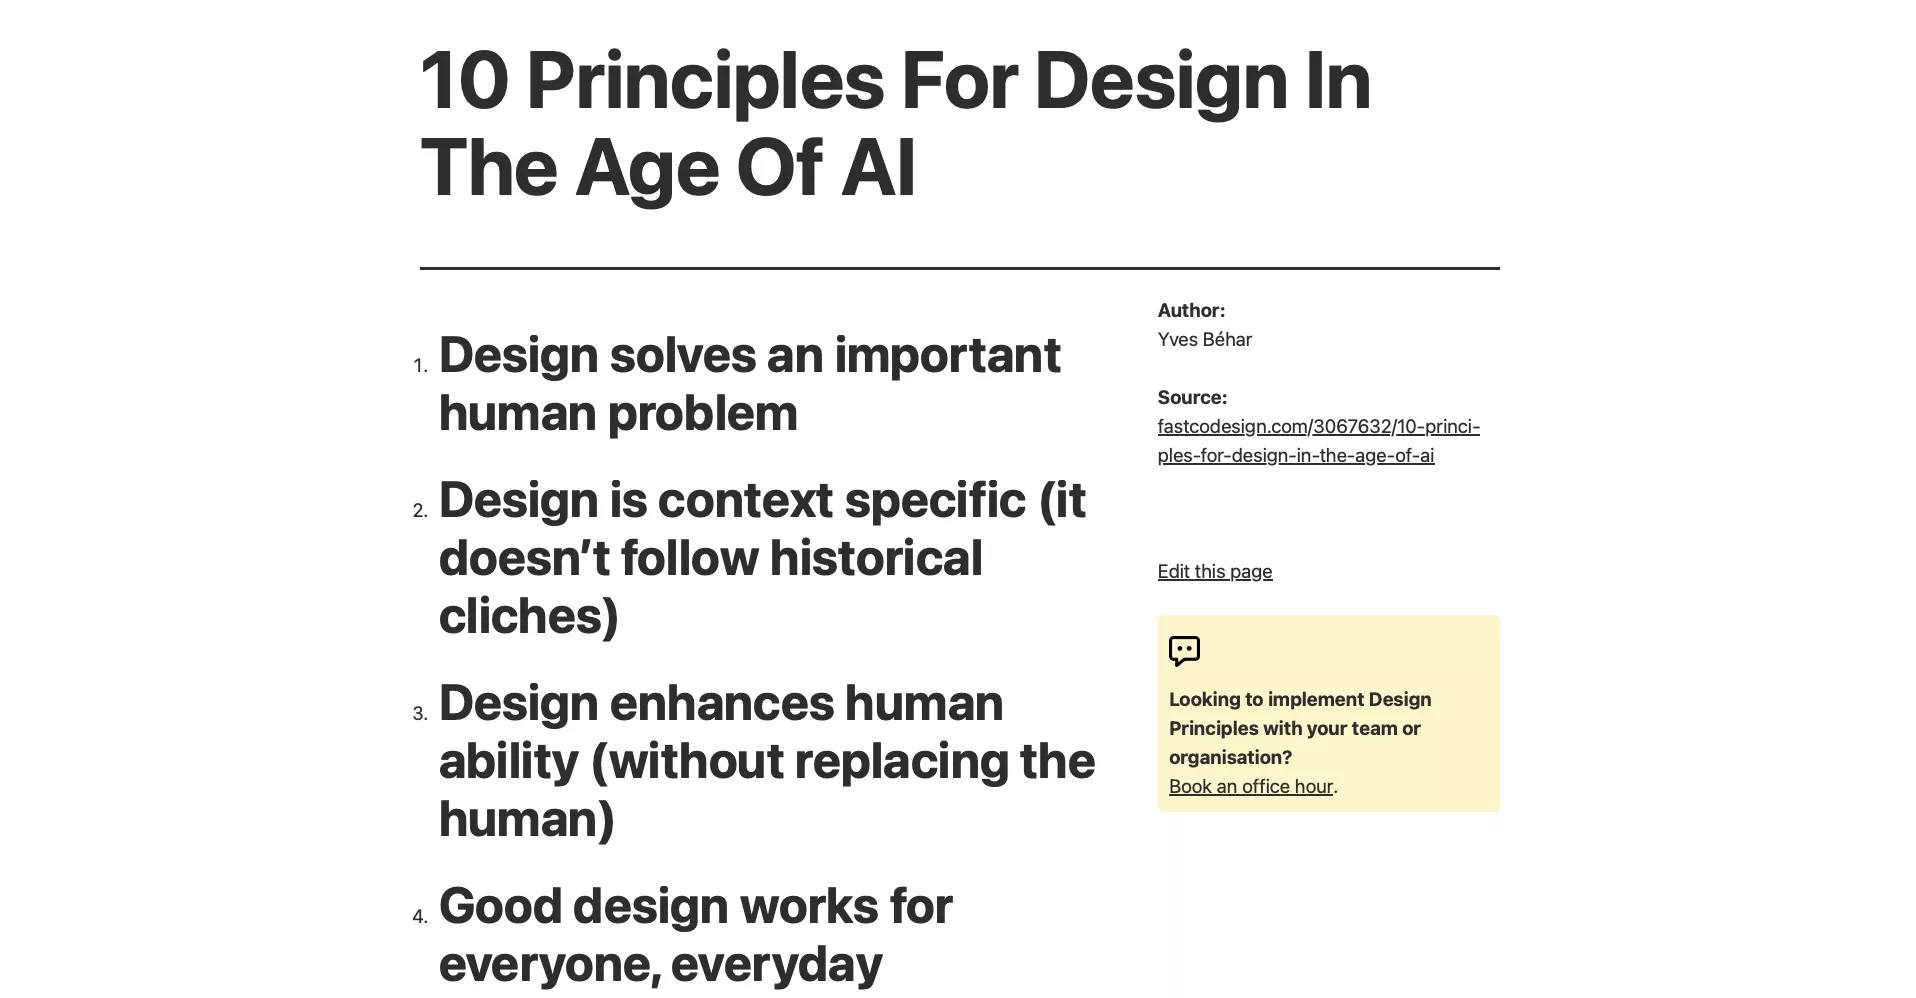 Yves Behar's 10 Principles for Design in the Age of AI